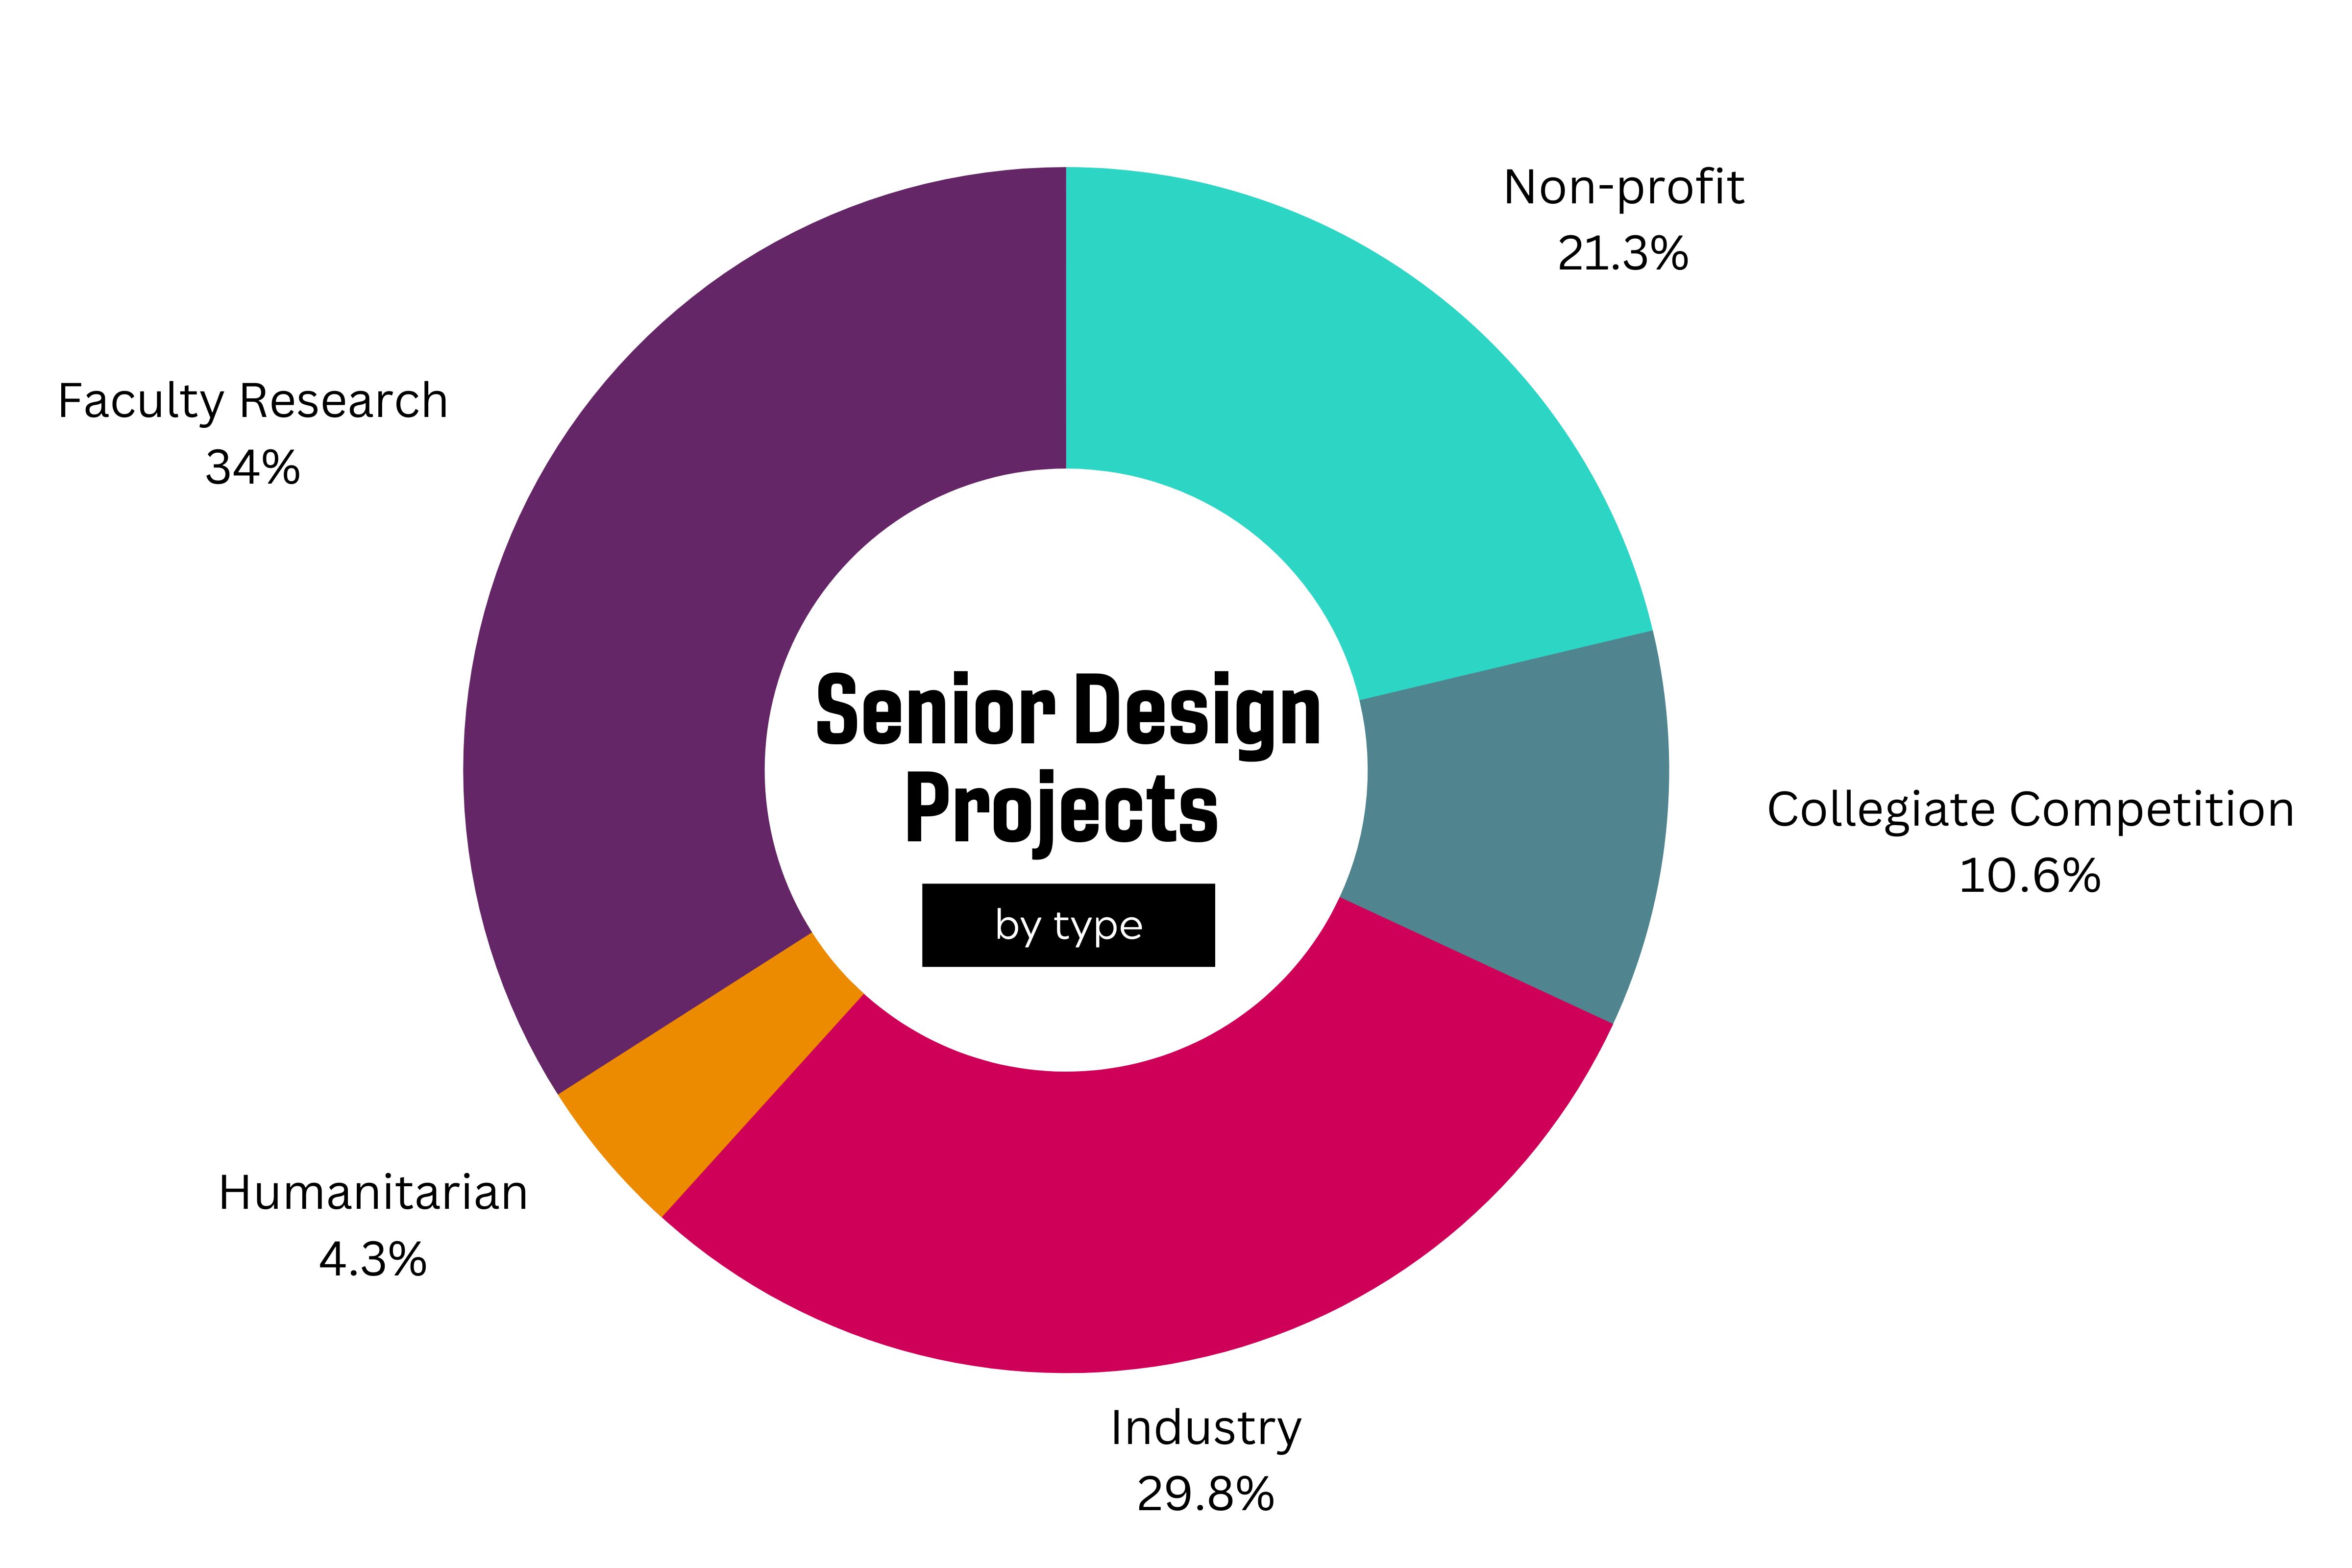 A pie chart describing the breakdown of senior design projects by type for 22-23: faculty research, non-profit, humanitarian, industry and collegiate competition.